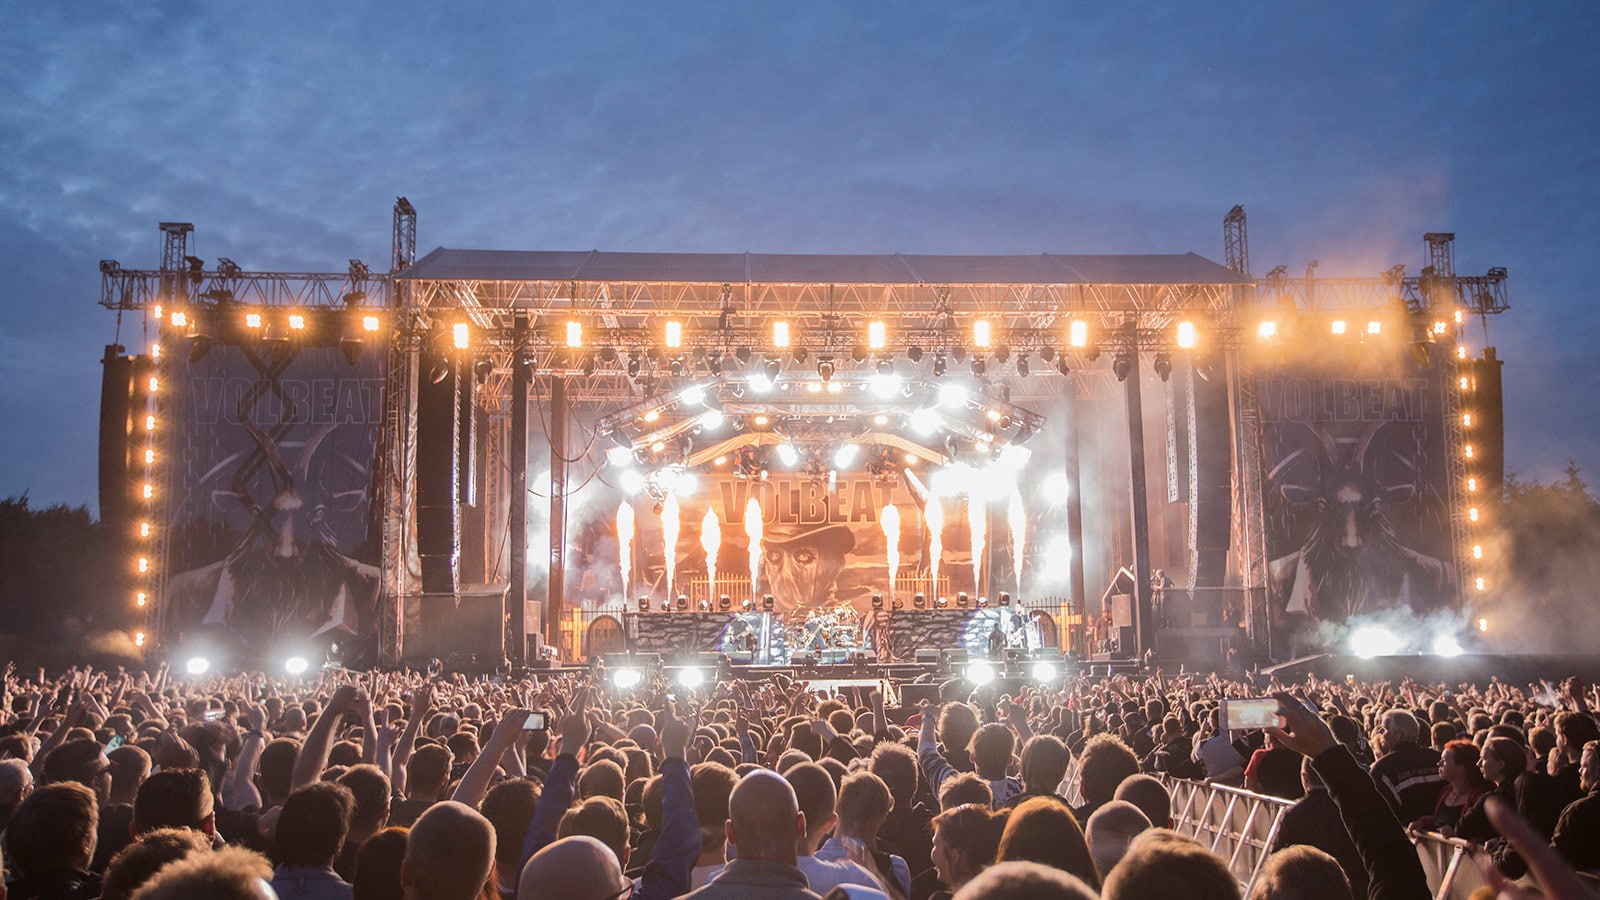 Volbeat Breaks Danish Records at Homecoming Show with Meyer Sound LEO